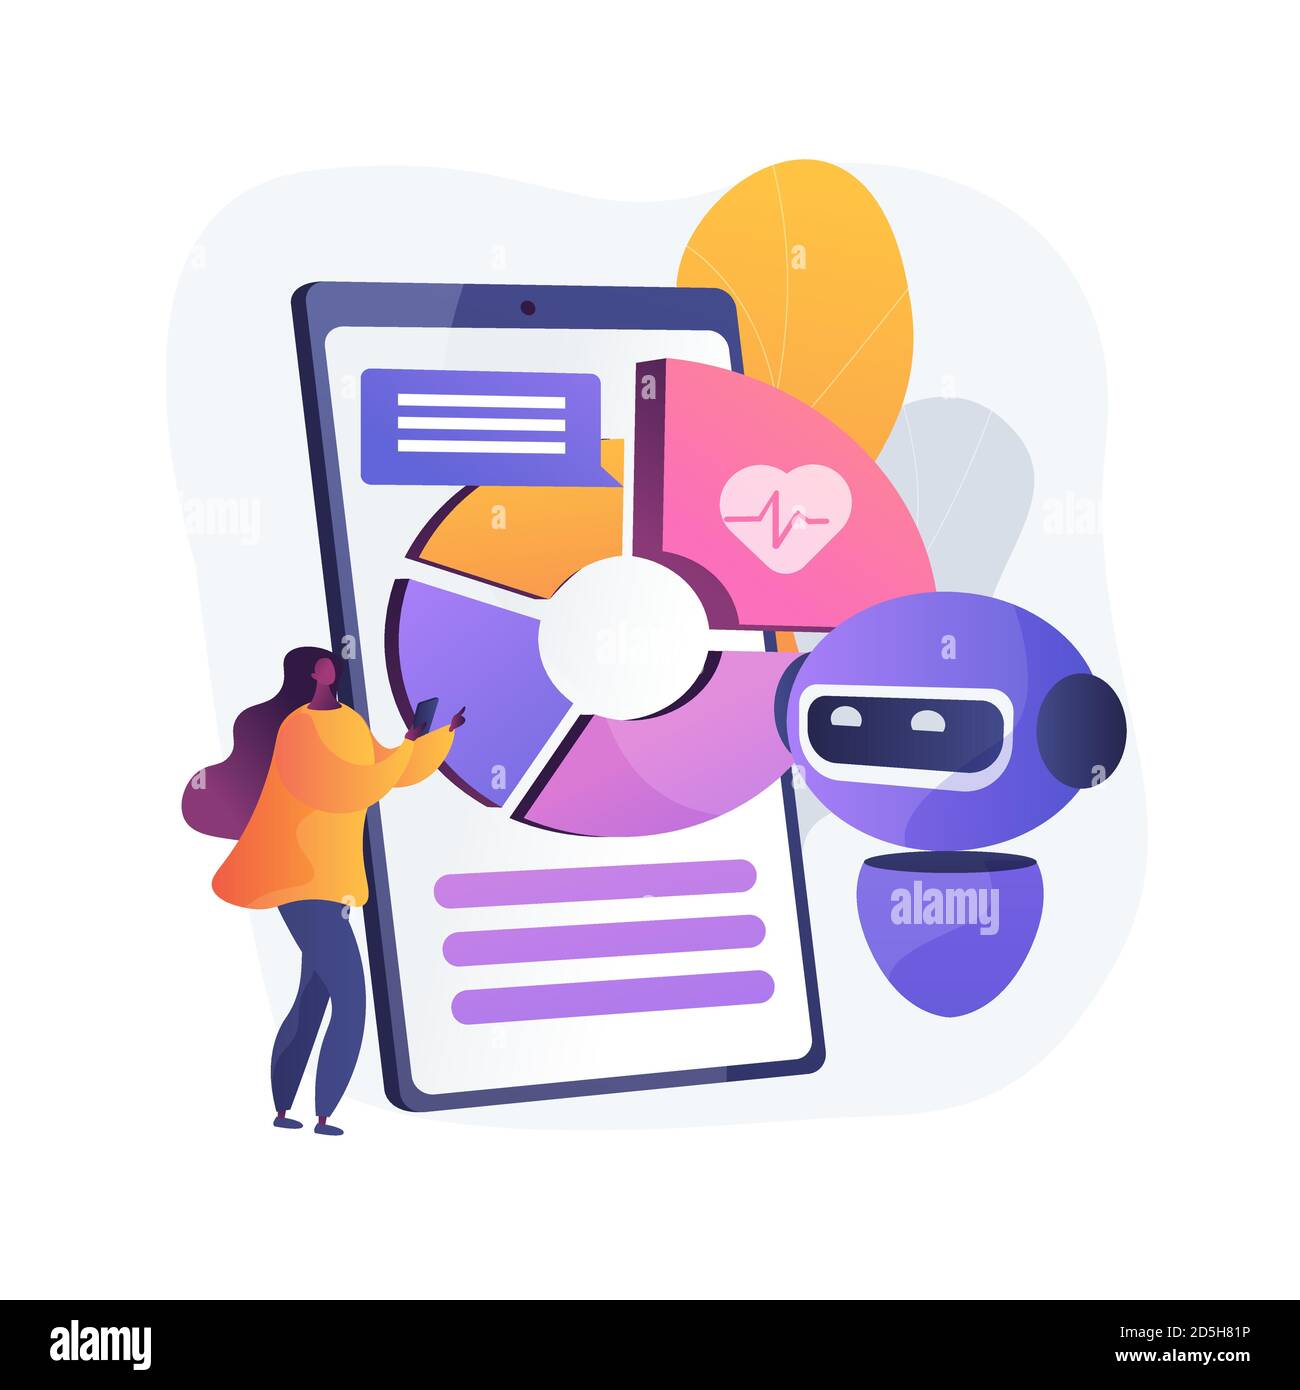 Digital wellbeing abstract concept vector illustration. Stock Vector